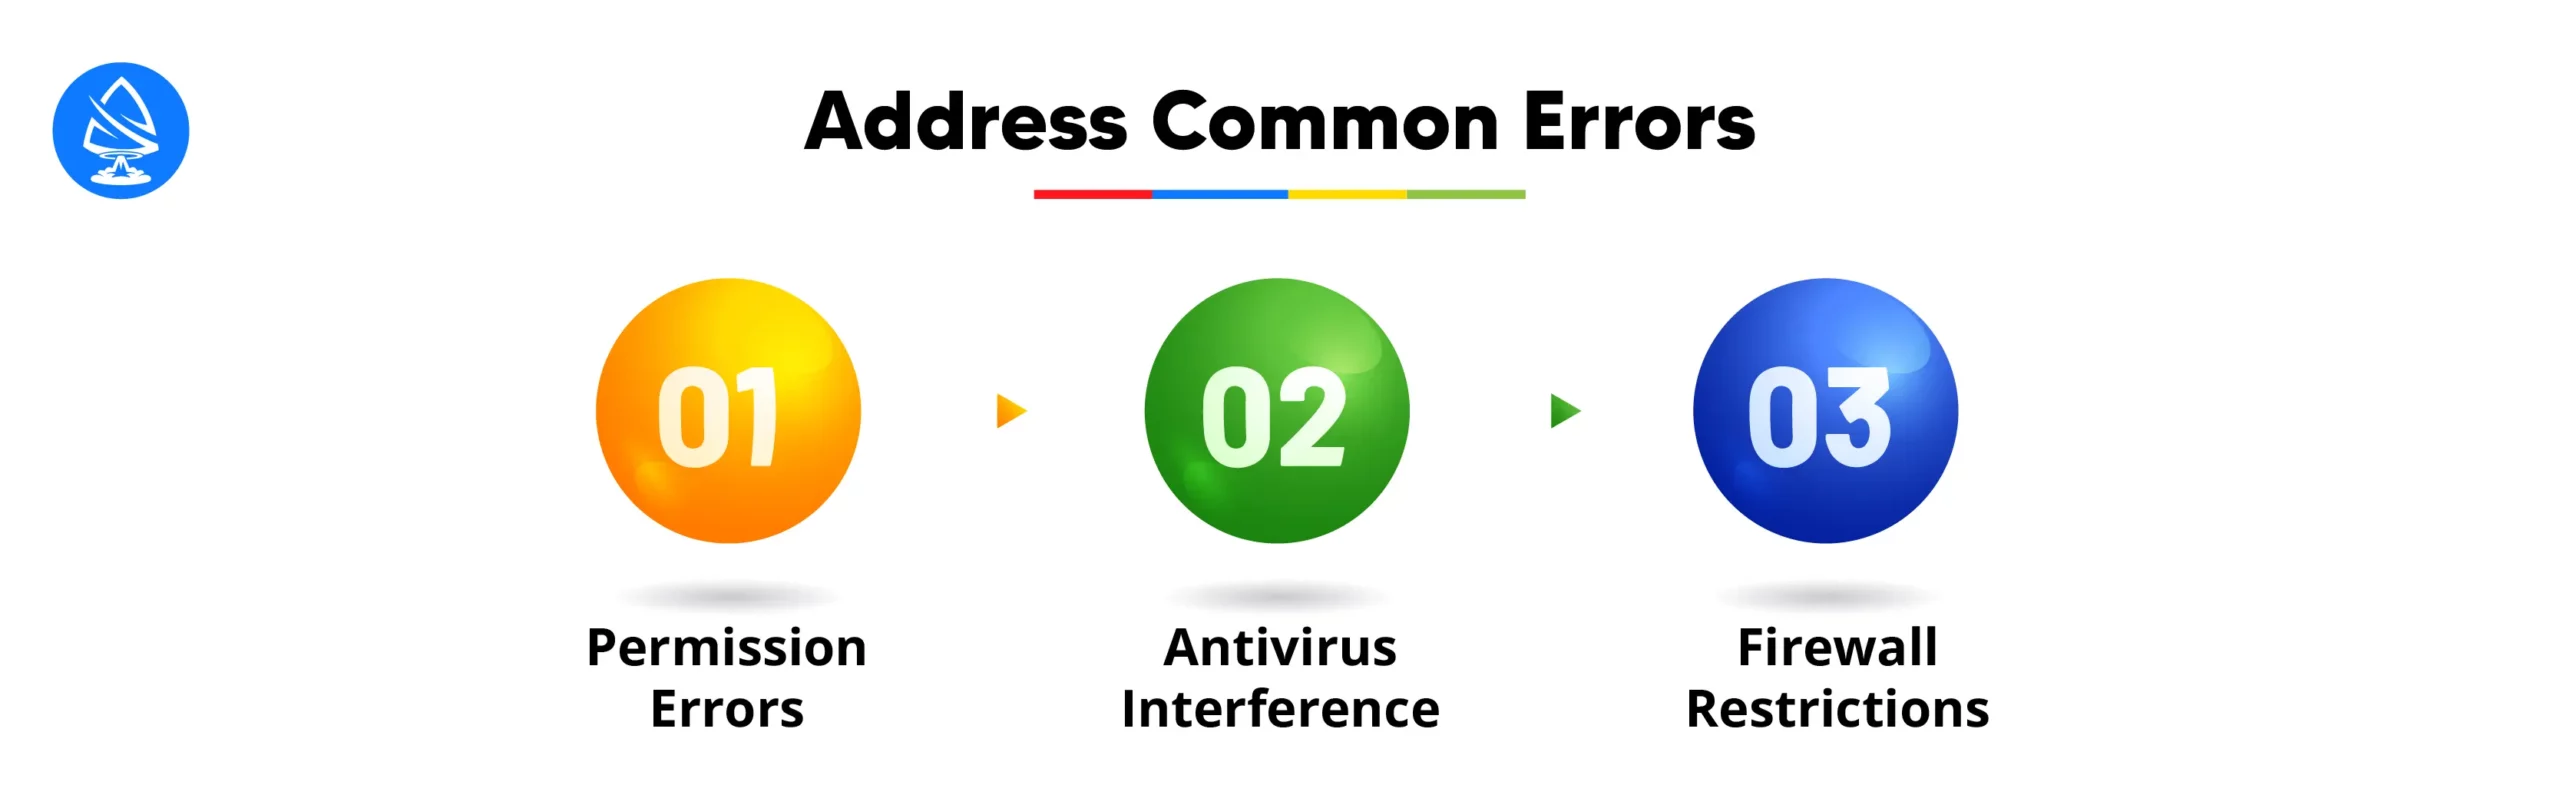 Addressing Common Errors and Issues Encountered During Installation: 